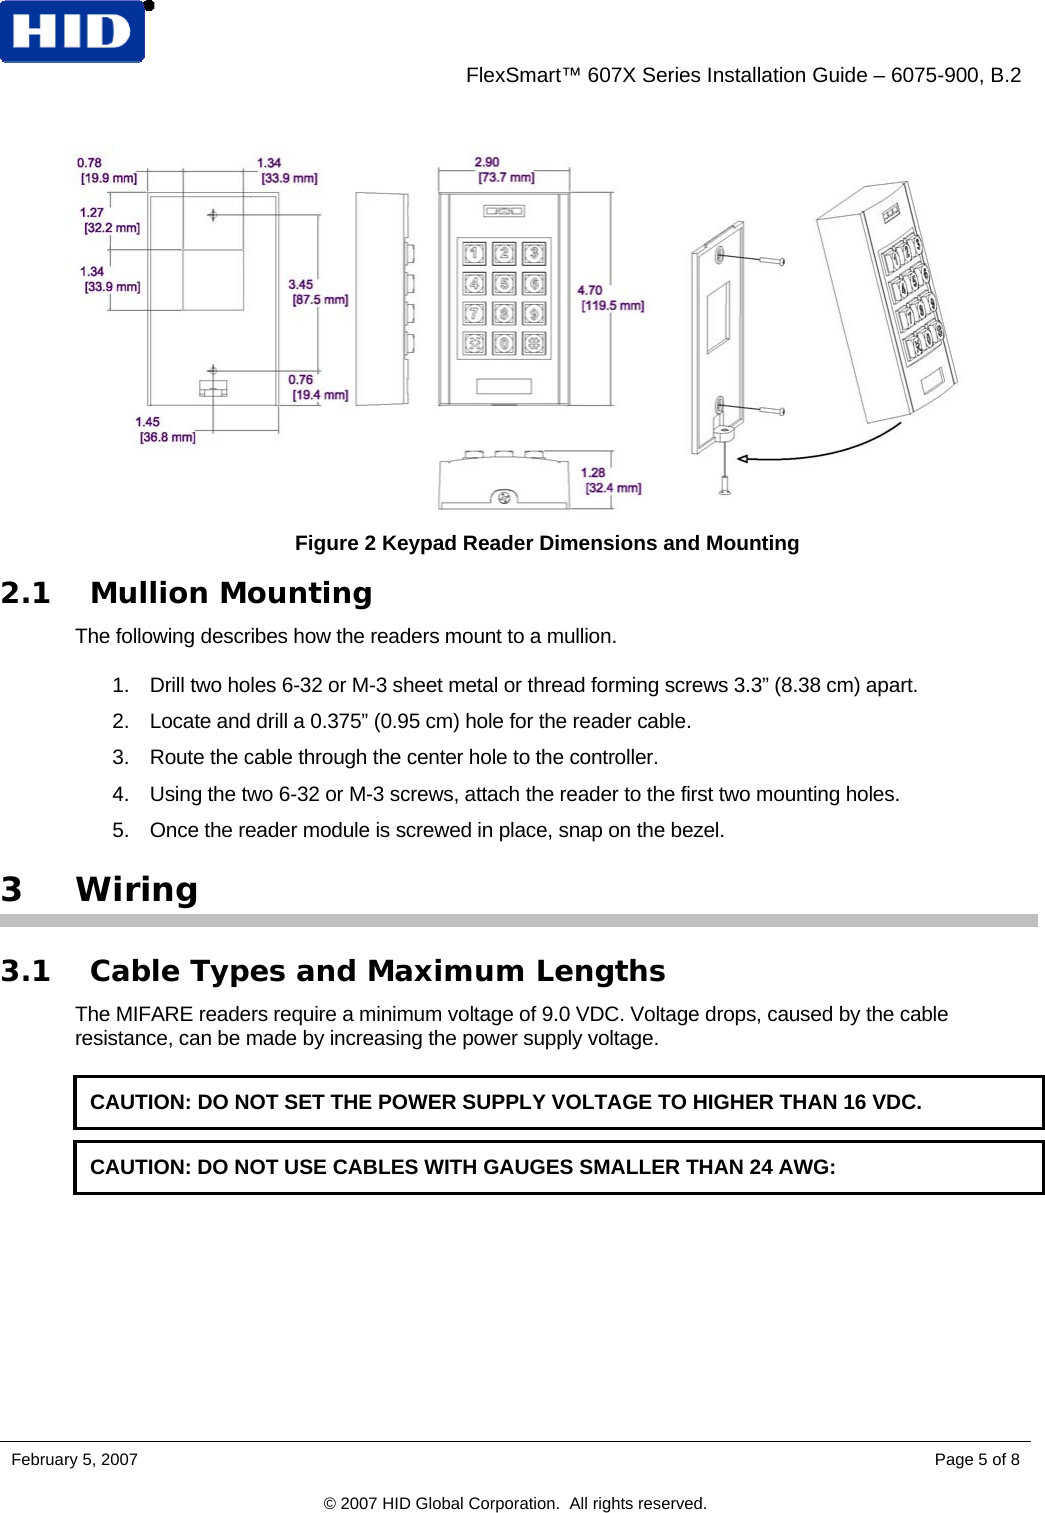    FlexSmart™ 607X Series Installation Guide – 6075-900, B.2  Figure 2 Keypad Reader Dimensions and Mounting 2.1 Mullion Mounting The following describes how the readers mount to a mullion.  1.  Drill two holes 6-32 or M-3 sheet metal or thread forming screws 3.3” (8.38 cm) apart.  2.  Locate and drill a 0.375” (0.95 cm) hole for the reader cable.  3.  Route the cable through the center hole to the controller.  4.  Using the two 6-32 or M-3 screws, attach the reader to the first two mounting holes.  5.  Once the reader module is screwed in place, snap on the bezel. 3 Wiring 3.1 Cable Types and Maximum Lengths The MIFARE readers require a minimum voltage of 9.0 VDC. Voltage drops, caused by the cable resistance, can be made by increasing the power supply voltage.  CAUTION: DO NOT SET THE POWER SUPPLY VOLTAGE TO HIGHER THAN 16 VDC.  CAUTION: DO NOT USE CABLES WITH GAUGES SMALLER THAN 24 AWG: February 5, 2007    Page 5 of 8 © 2007 HID Global Corporation.  All rights reserved.  